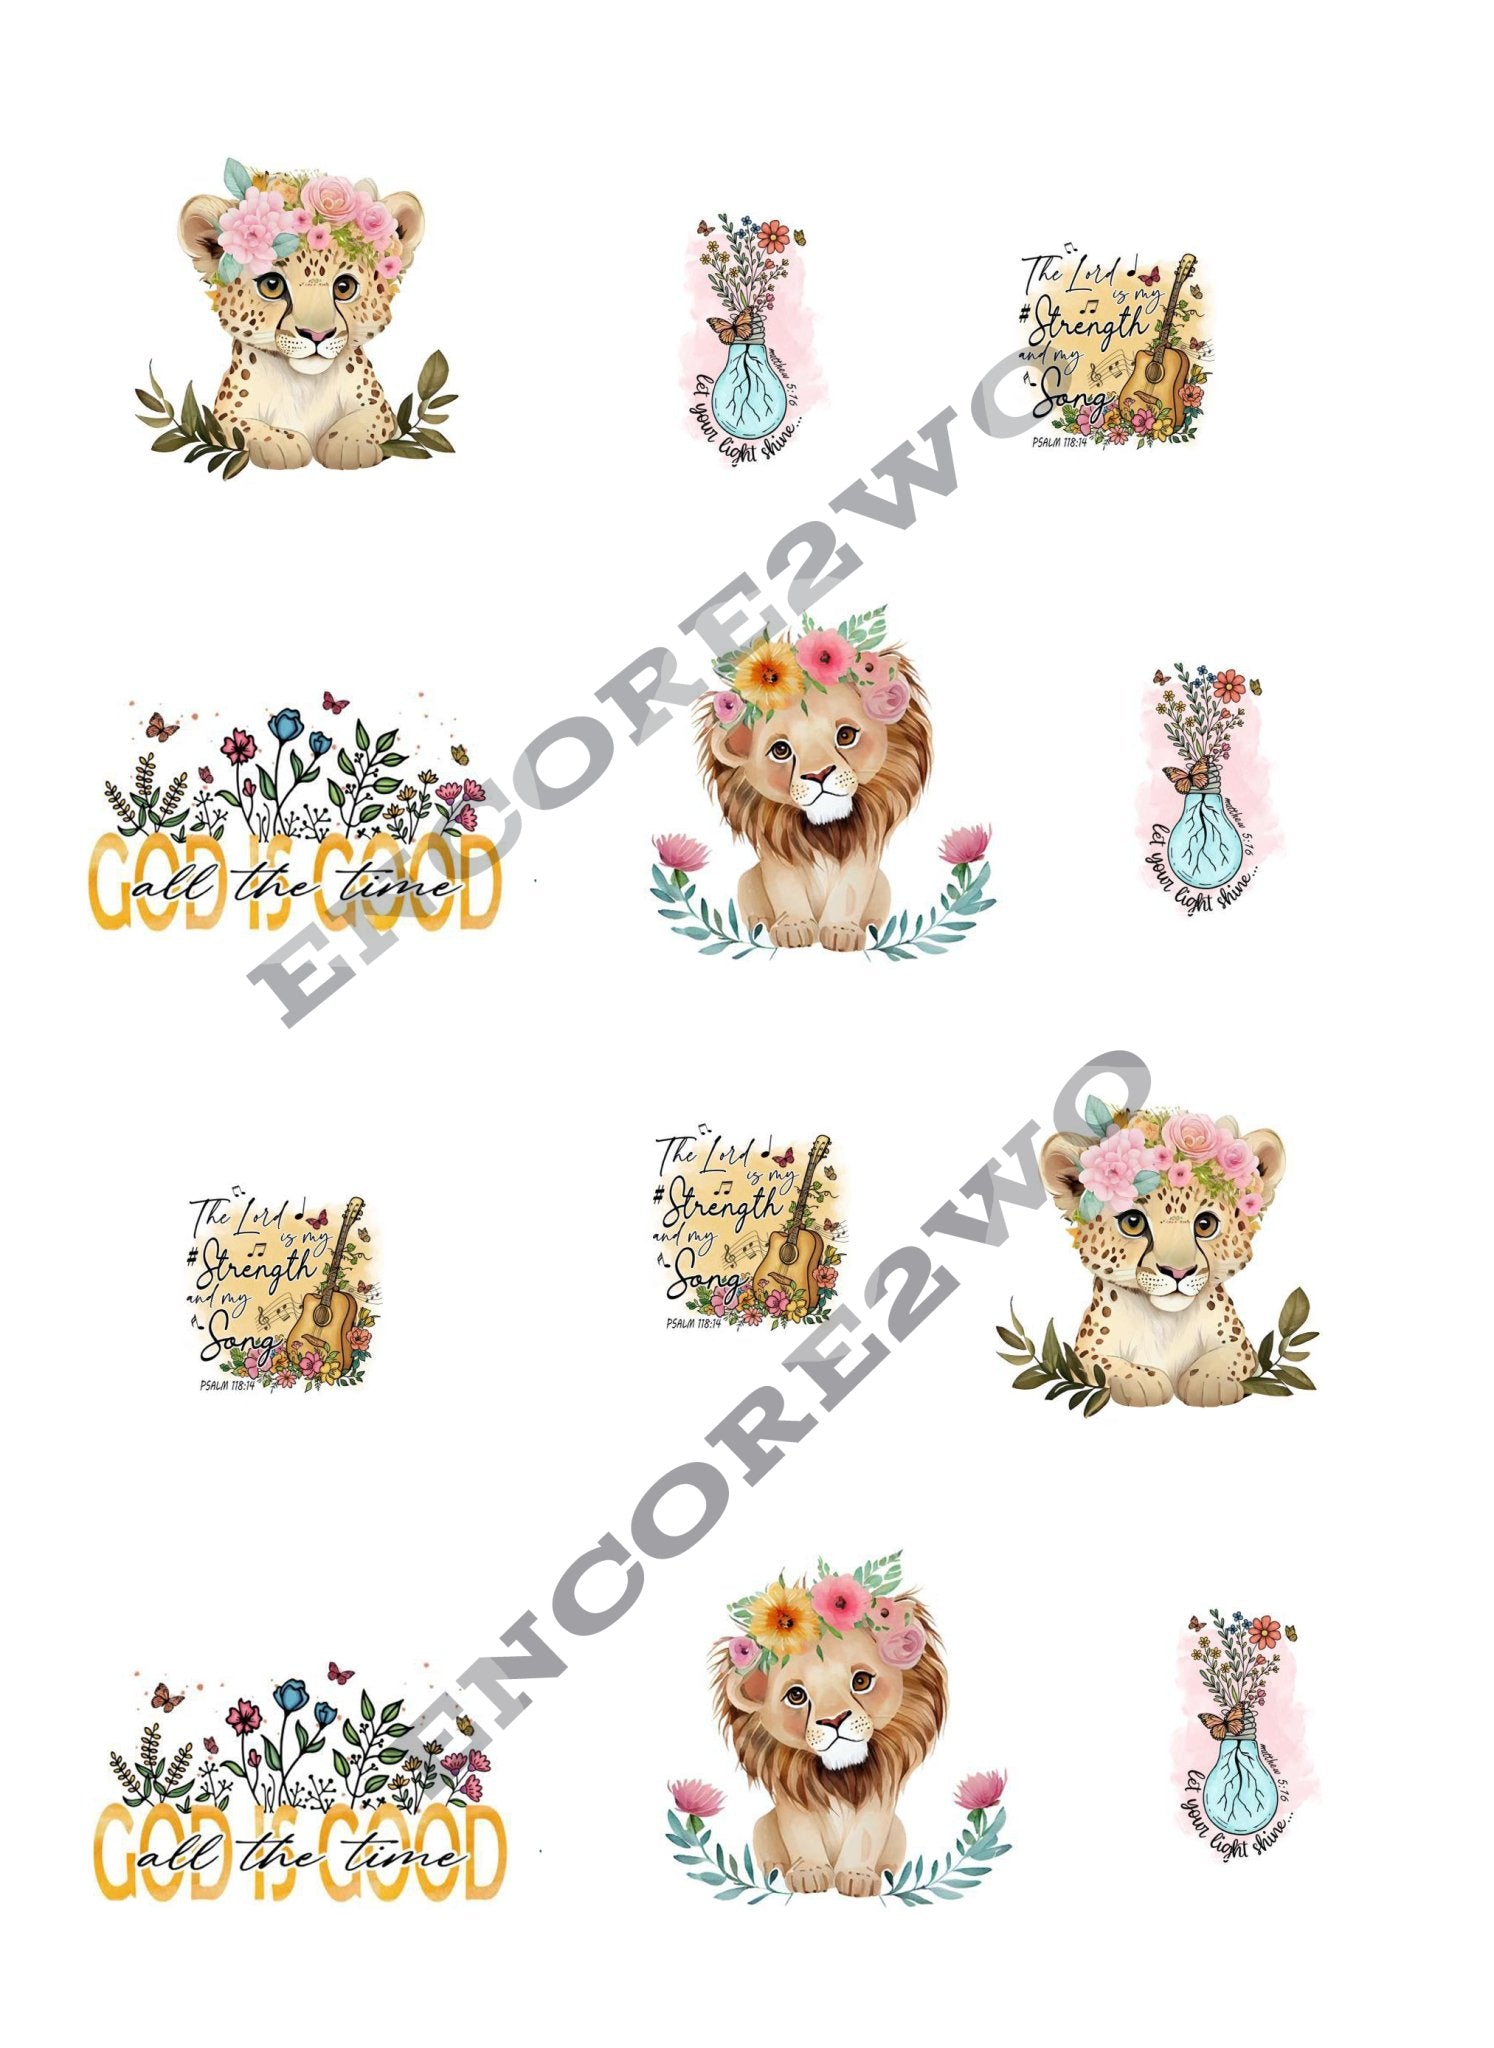 Printable Christian Stickers - Vol 2 Graphic by stacysdigitaldesigns ·  Creative Fabrica